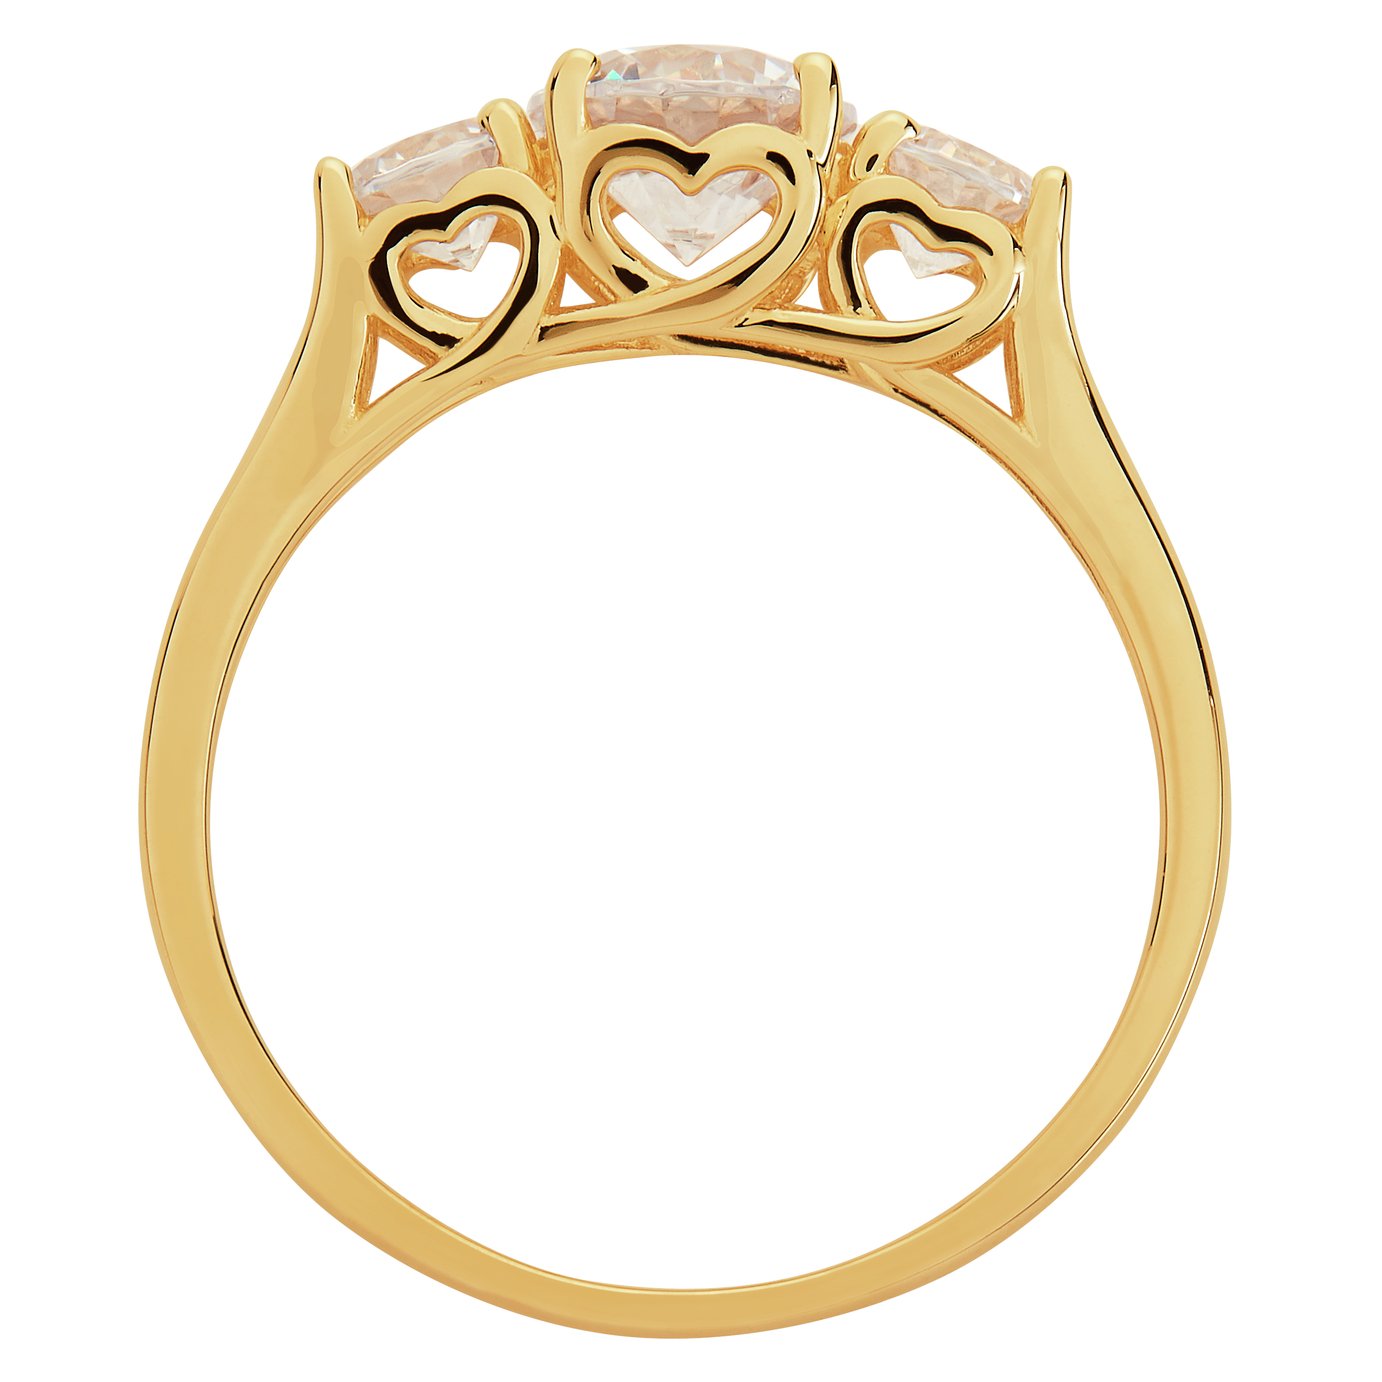 Revere 9ct Gold Round Cubic Zirconia Engagement Ring - O